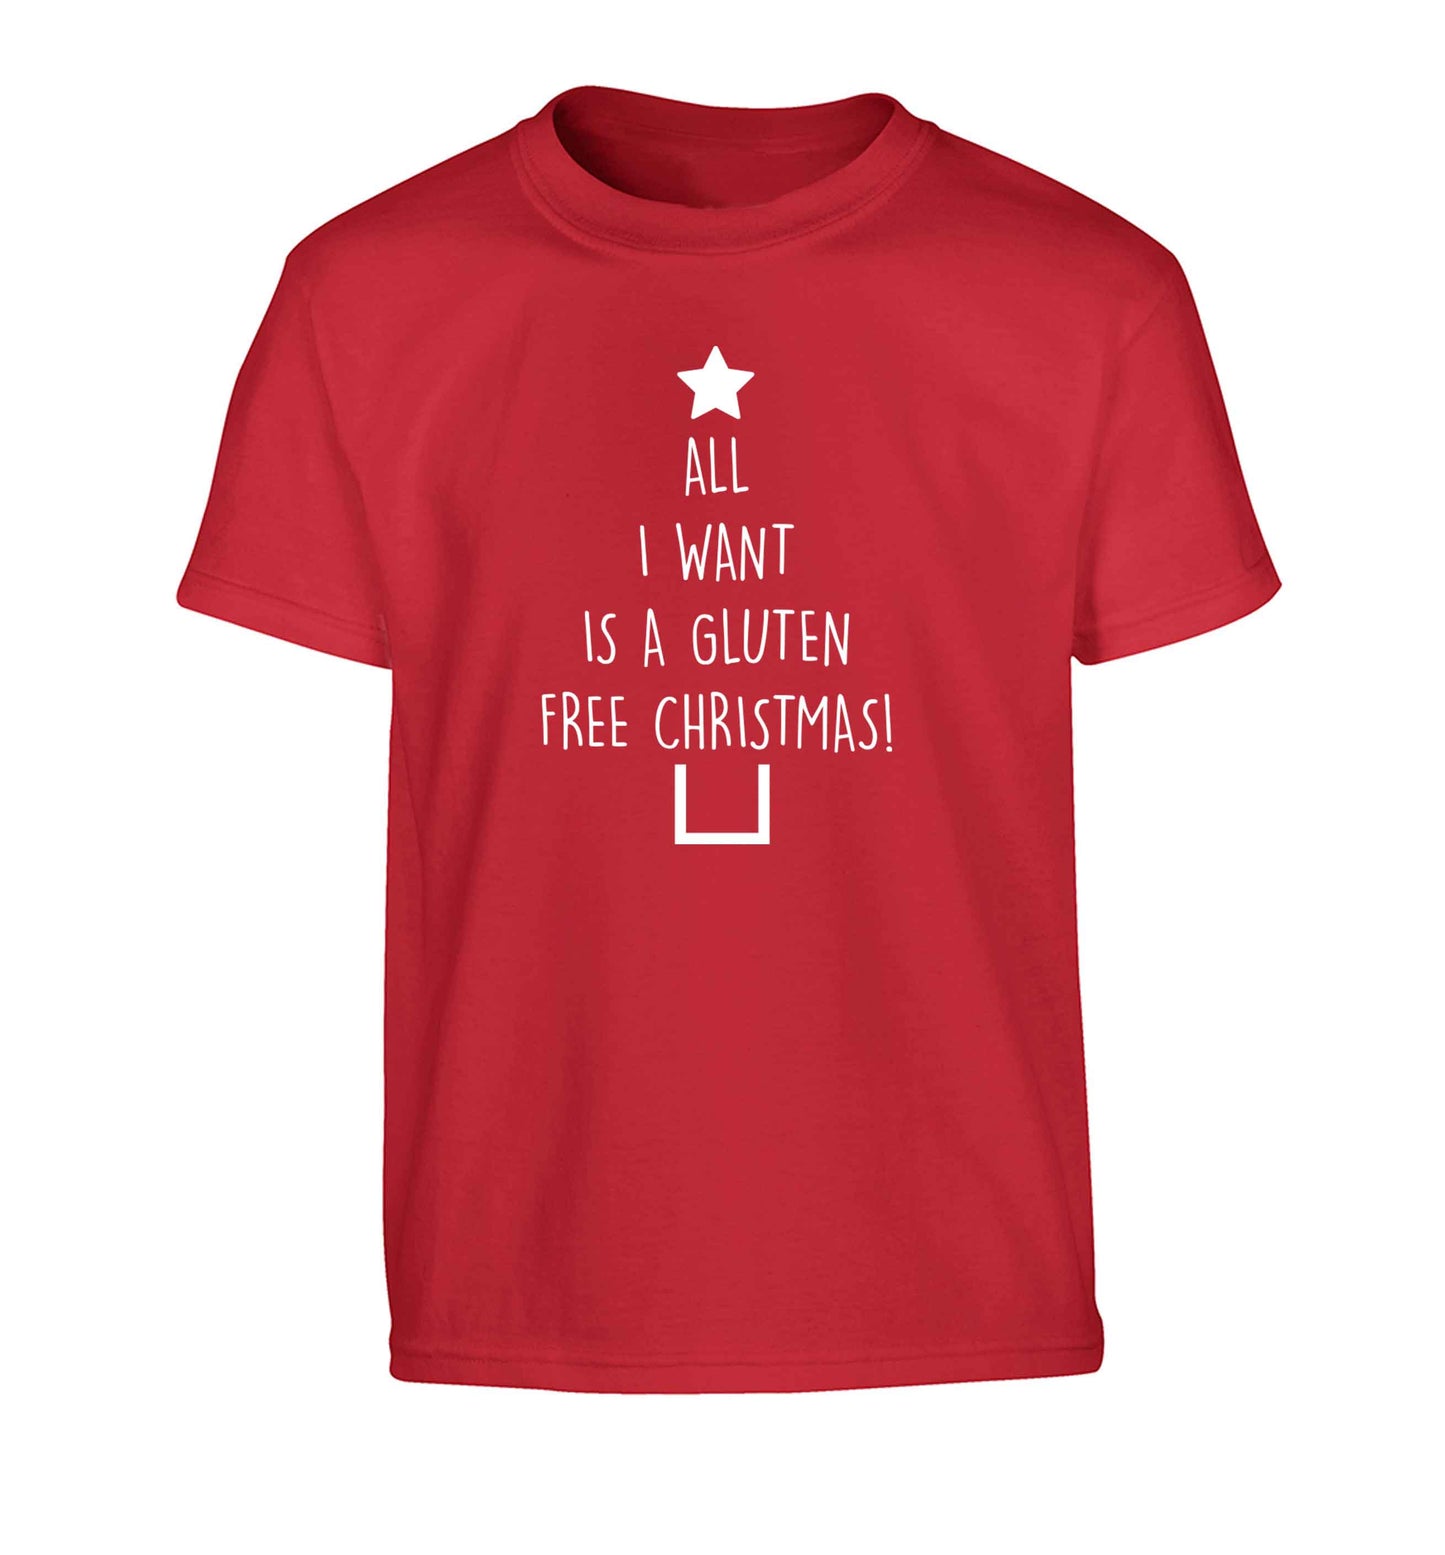 All I want is a gluten free Christmas Children's red Tshirt 12-13 Years